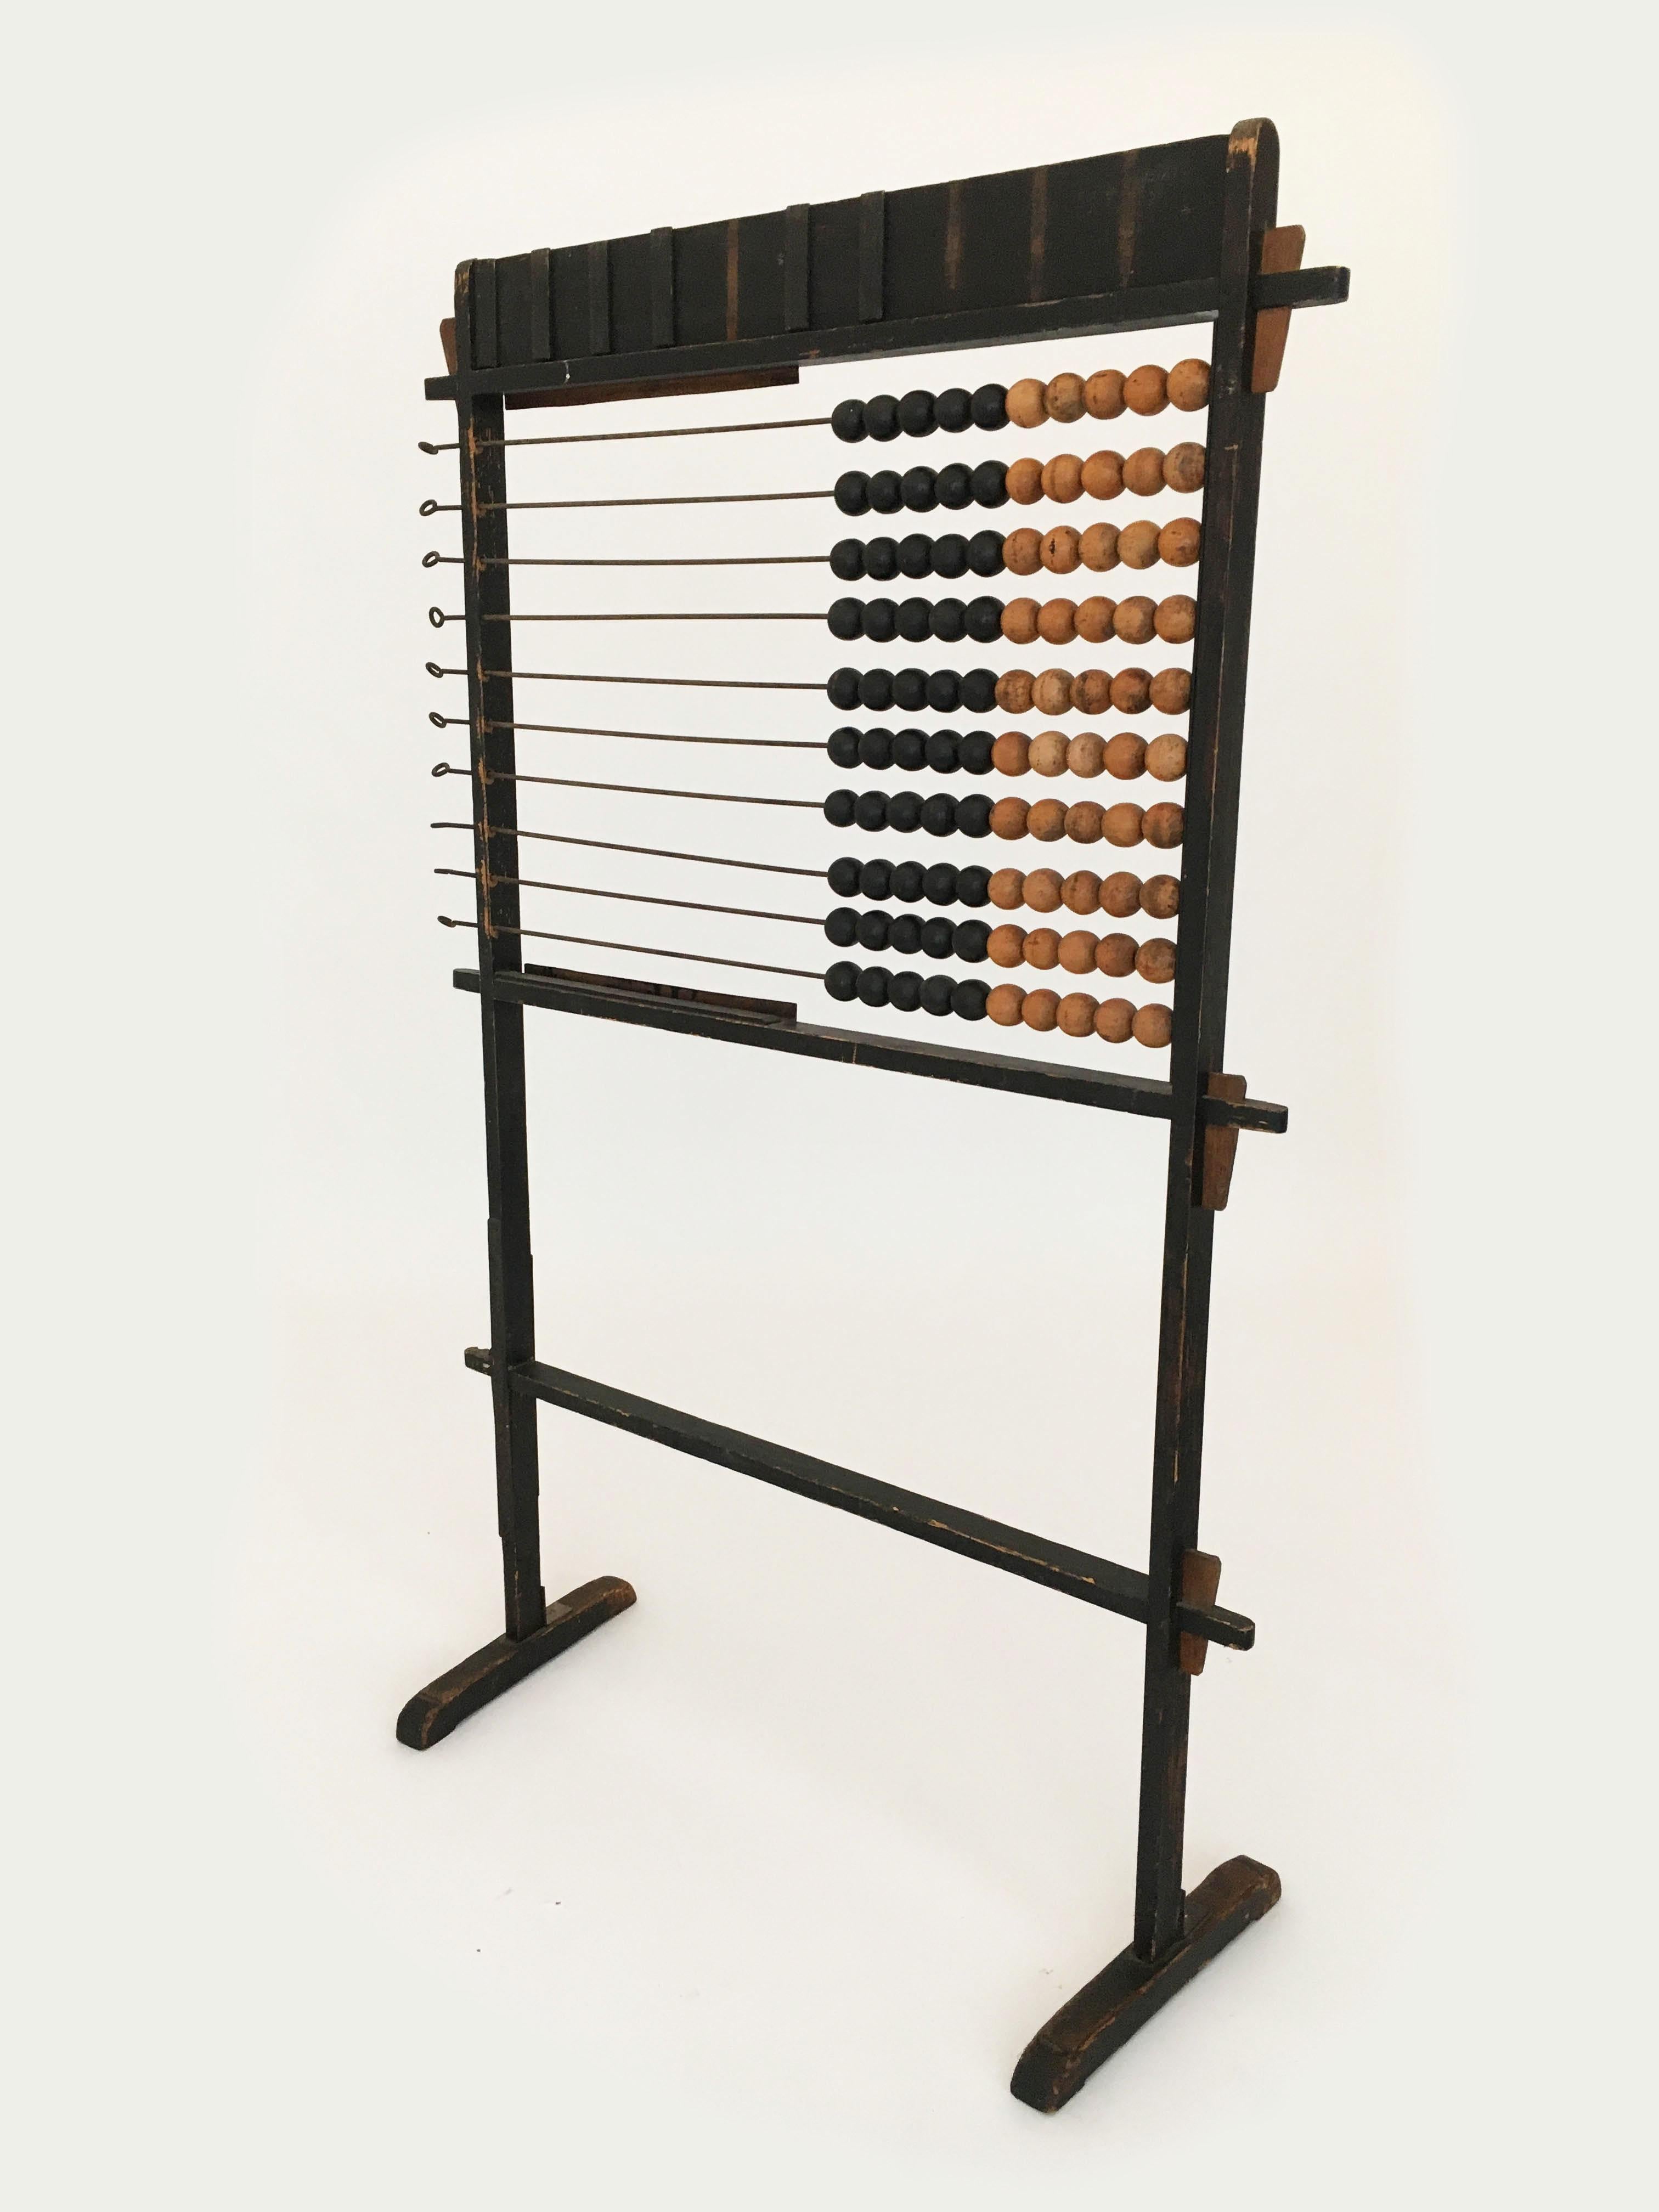 Form Follows Function Modern Abstract Abacus Obsolete Object, France, 1920s (Sonstiges) im Angebot